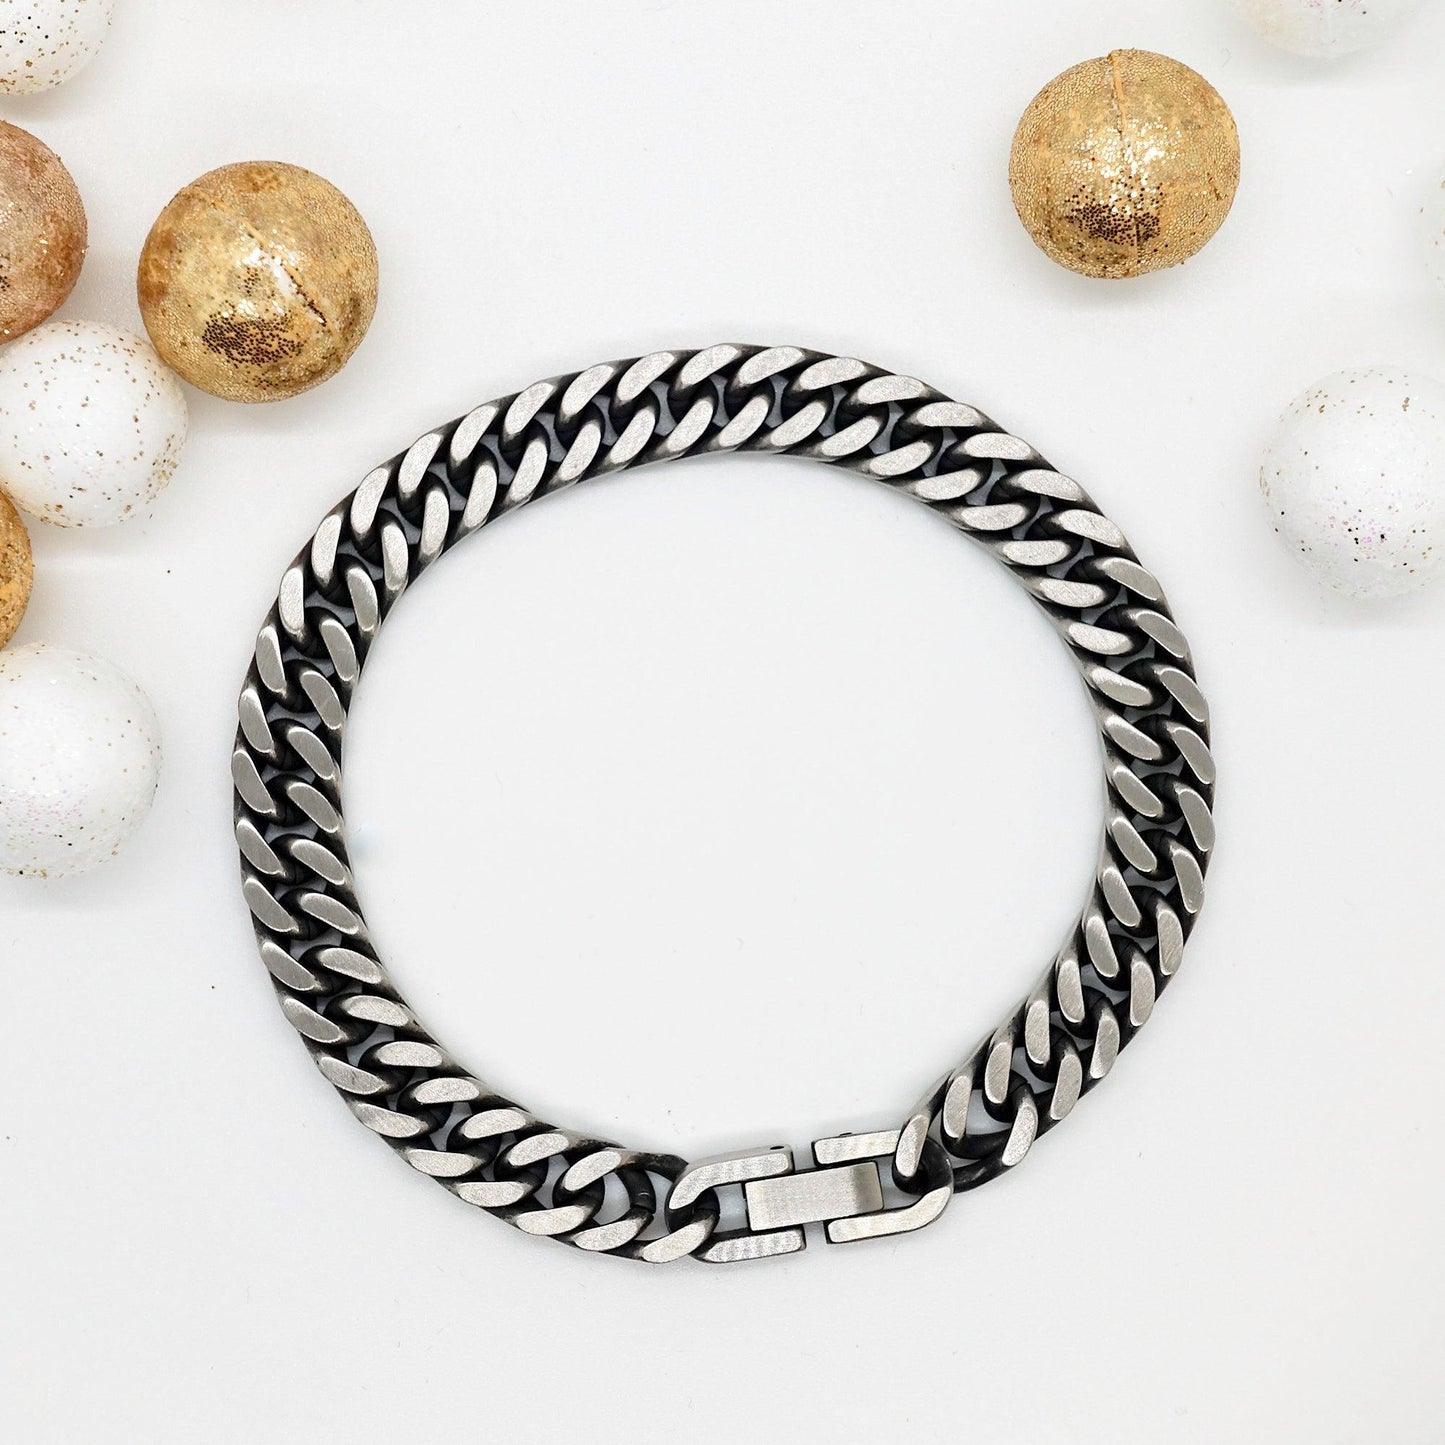 Remarkable Barber Gifts, Your dedication and hard work, Inspirational Birthday Christmas Unique Cuban Link Chain Bracelet For Barber, Coworkers, Men, Women, Friends - Mallard Moon Gift Shop